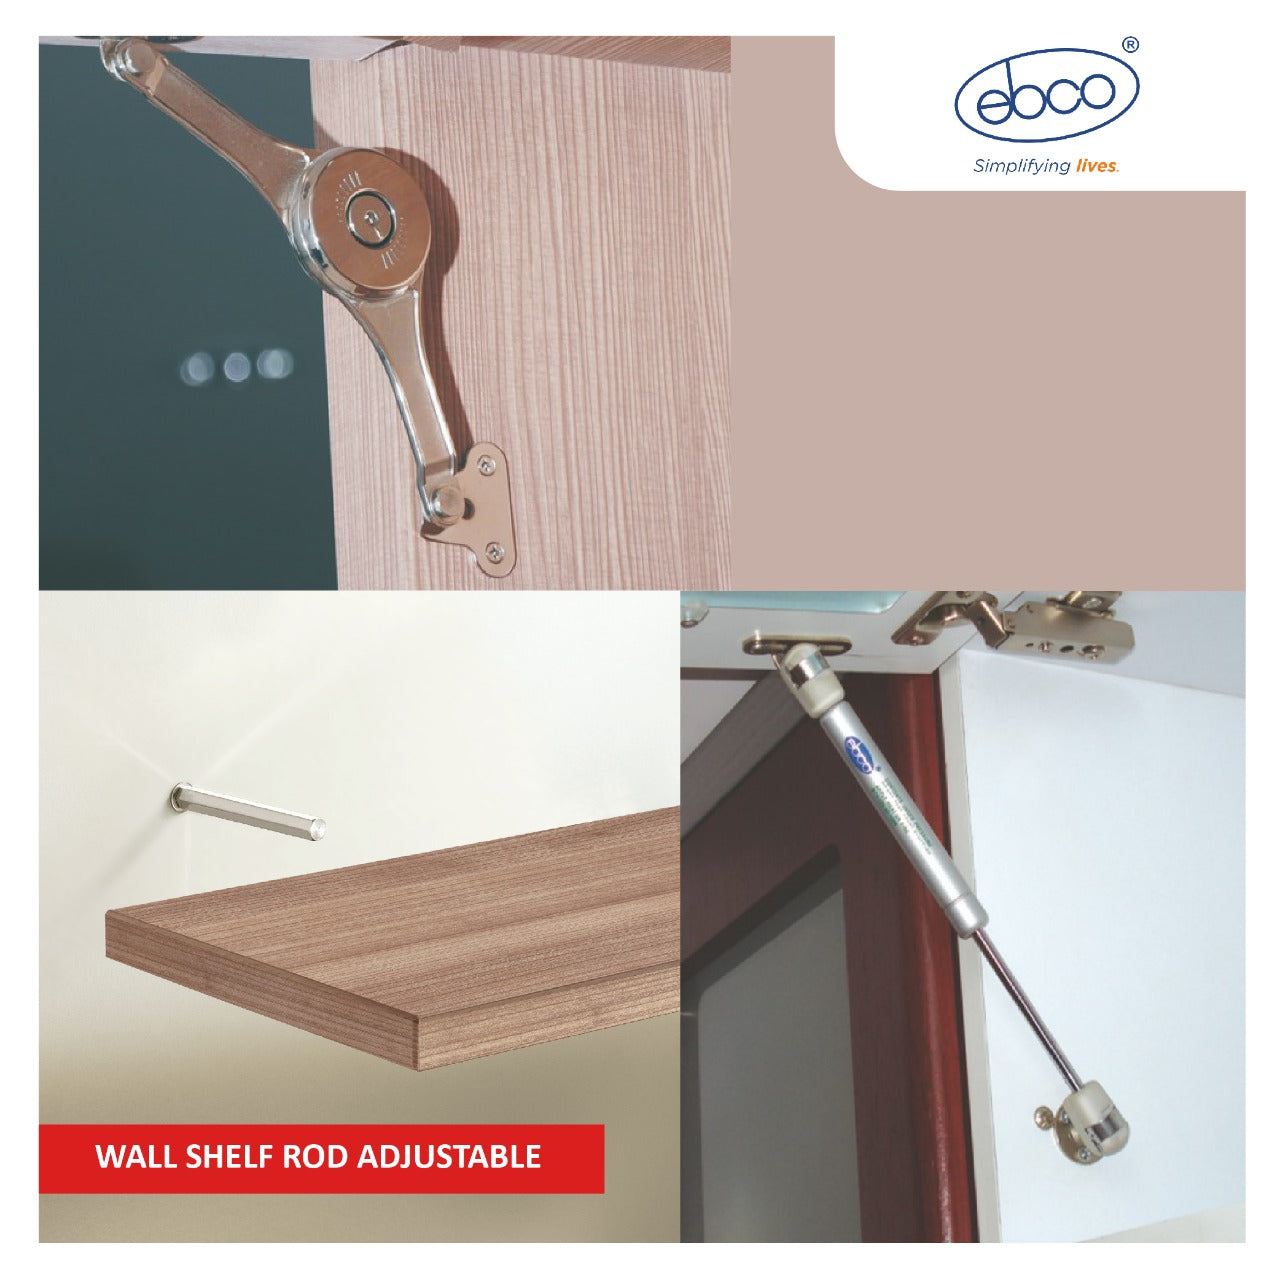 Adjustable Wall Shelf Rod in Ebco collection for versatile and organized shelving solutions at M. M. Noorbhoy & Co.